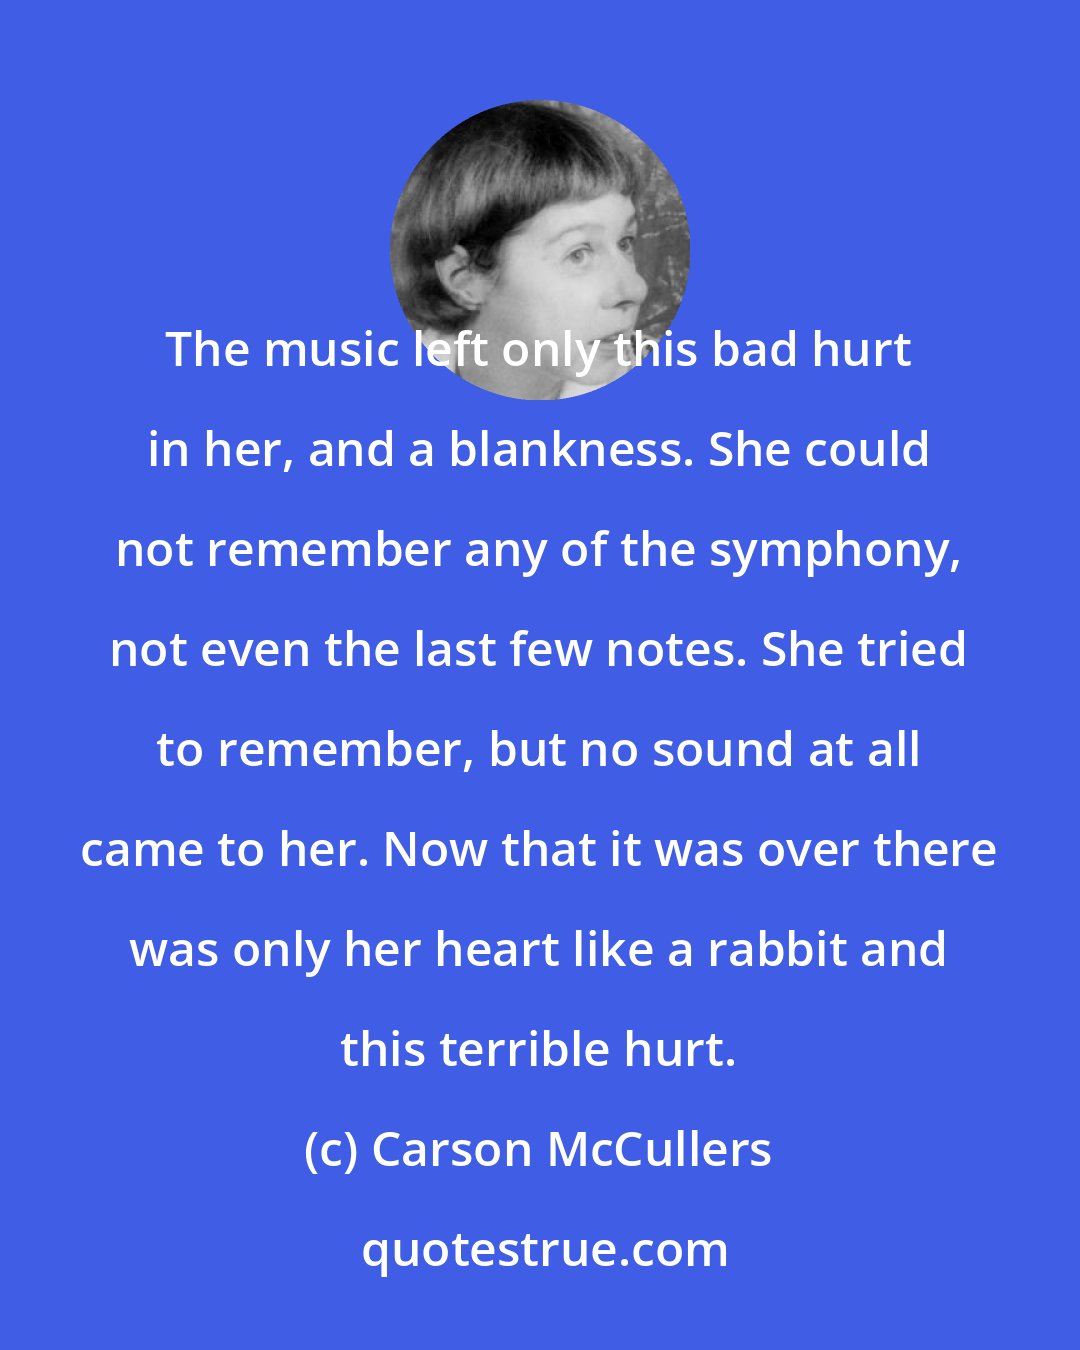 Carson McCullers: The music left only this bad hurt in her, and a blankness. She could not remember any of the symphony, not even the last few notes. She tried to remember, but no sound at all came to her. Now that it was over there was only her heart like a rabbit and this terrible hurt.